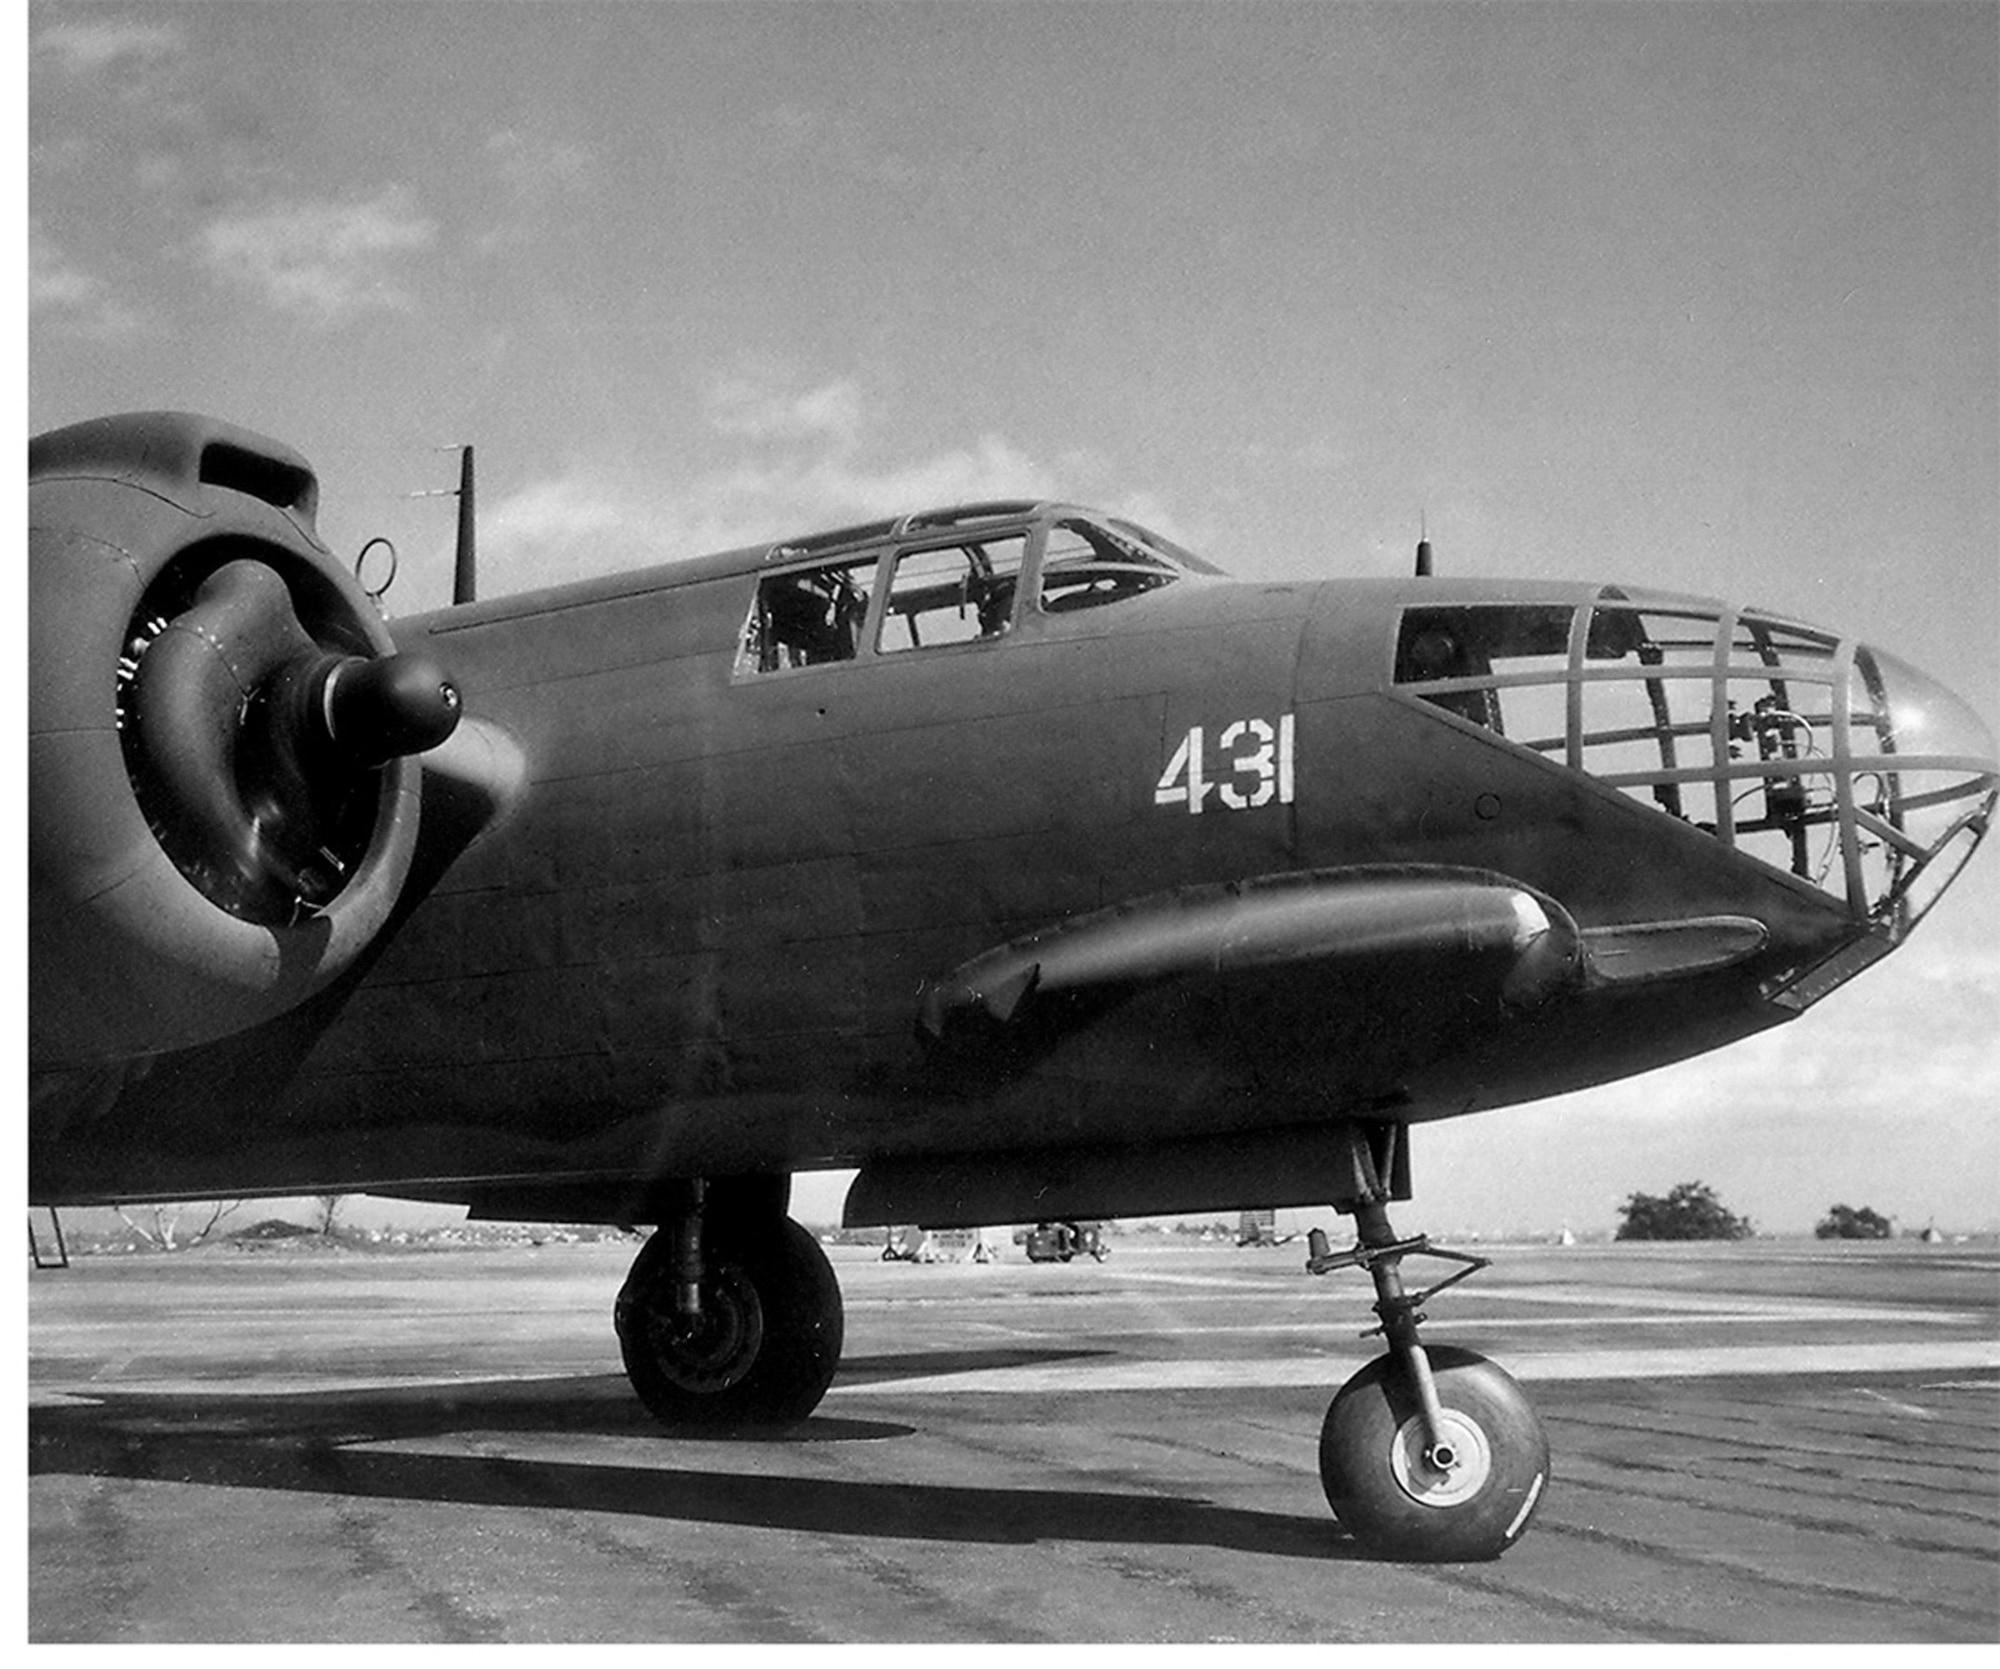 Members of the 110th Reconnaissance Squadron flew the Douglas A-20 “Havoc” during the early part of World War II. (131st Bomb Wing file photo/RELEASED)